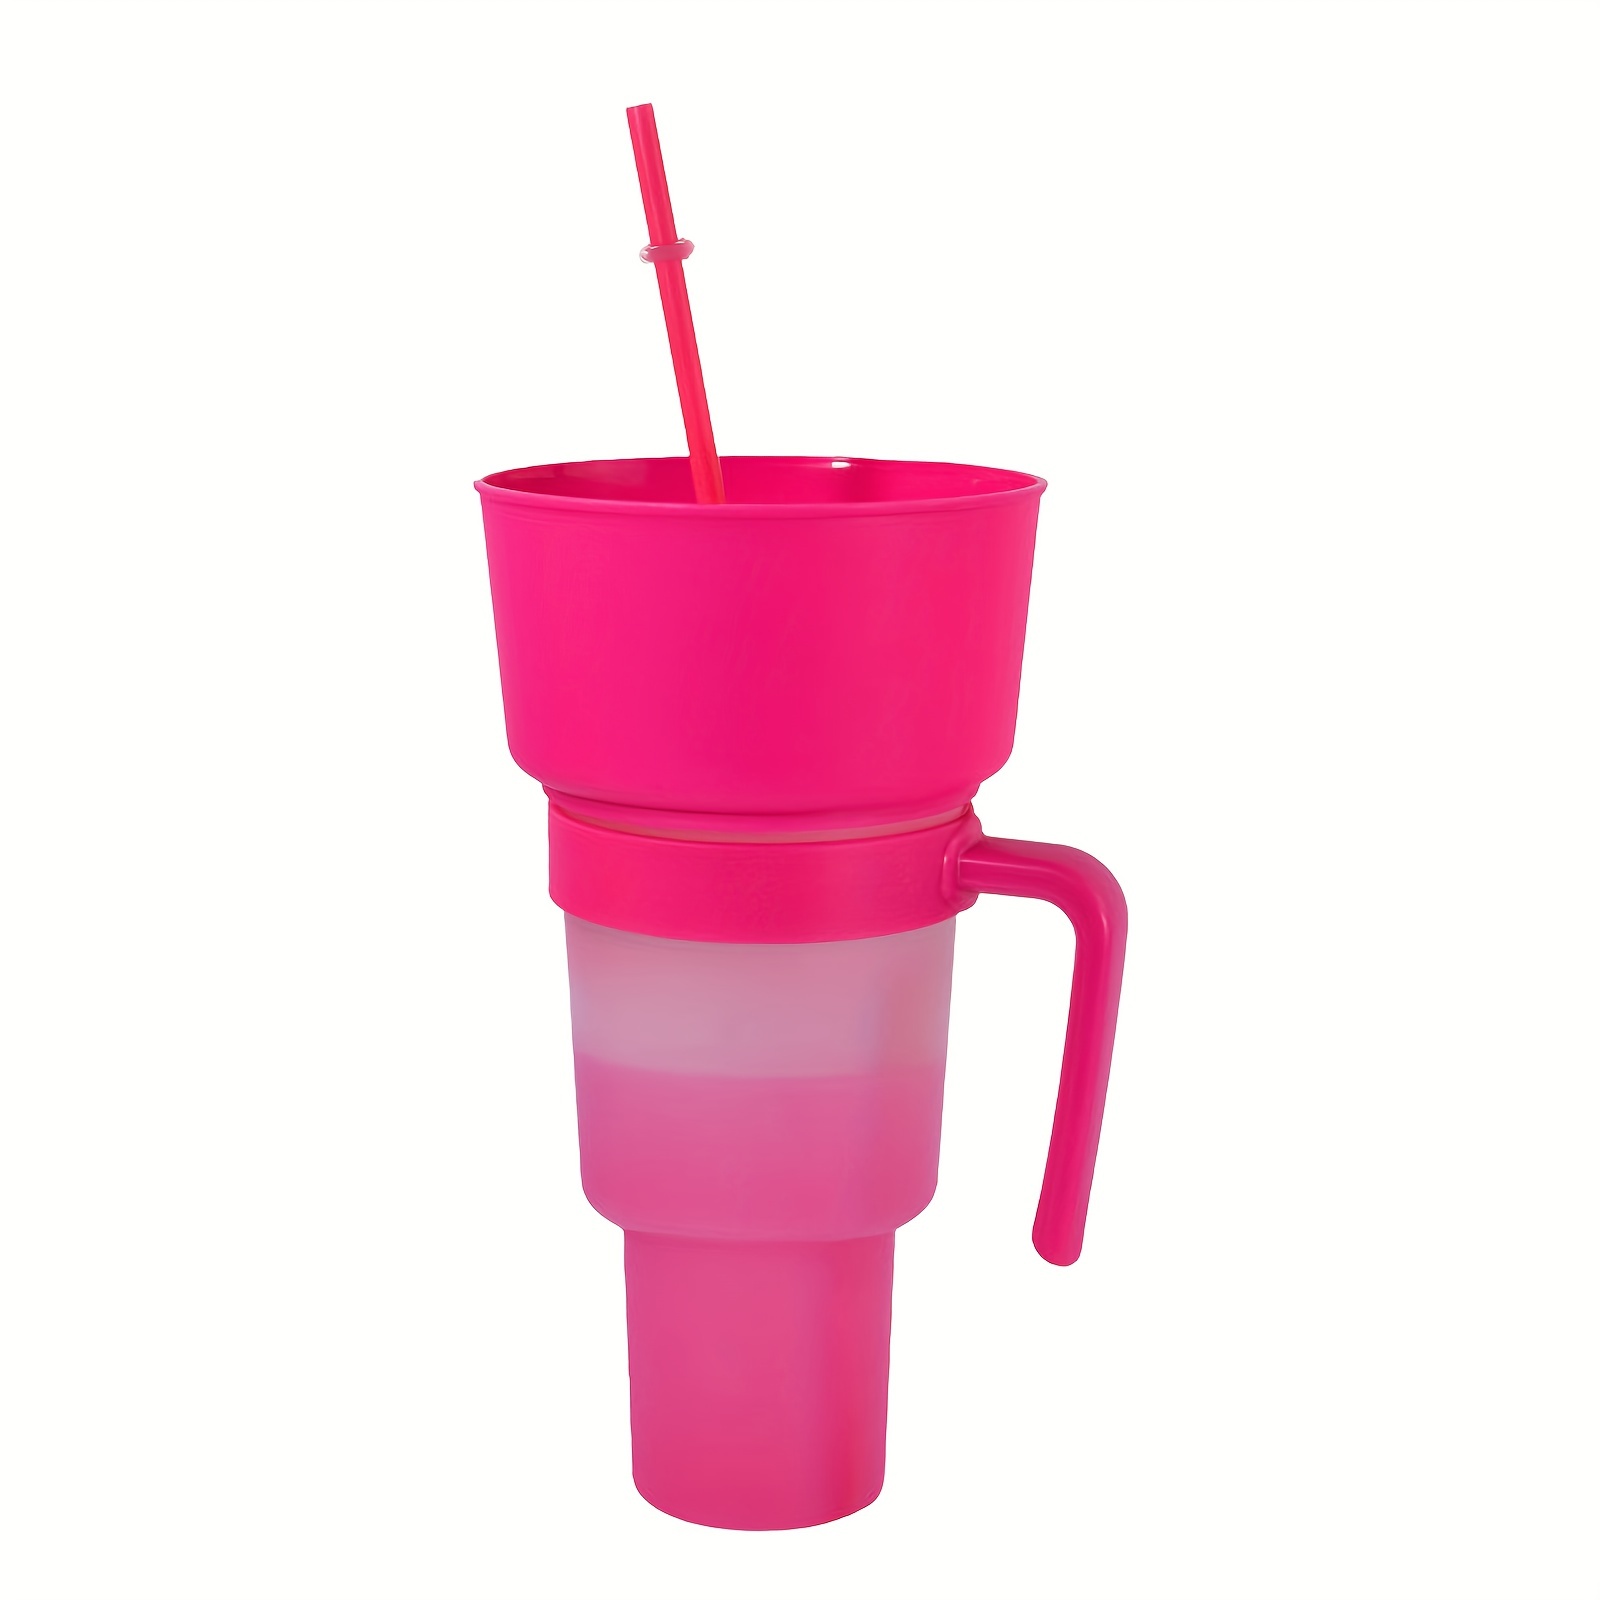 2 IN 1 TRAVEL SNACK DRINK CUP BOTTLE CONTAINER LID WITH STRAW 3D